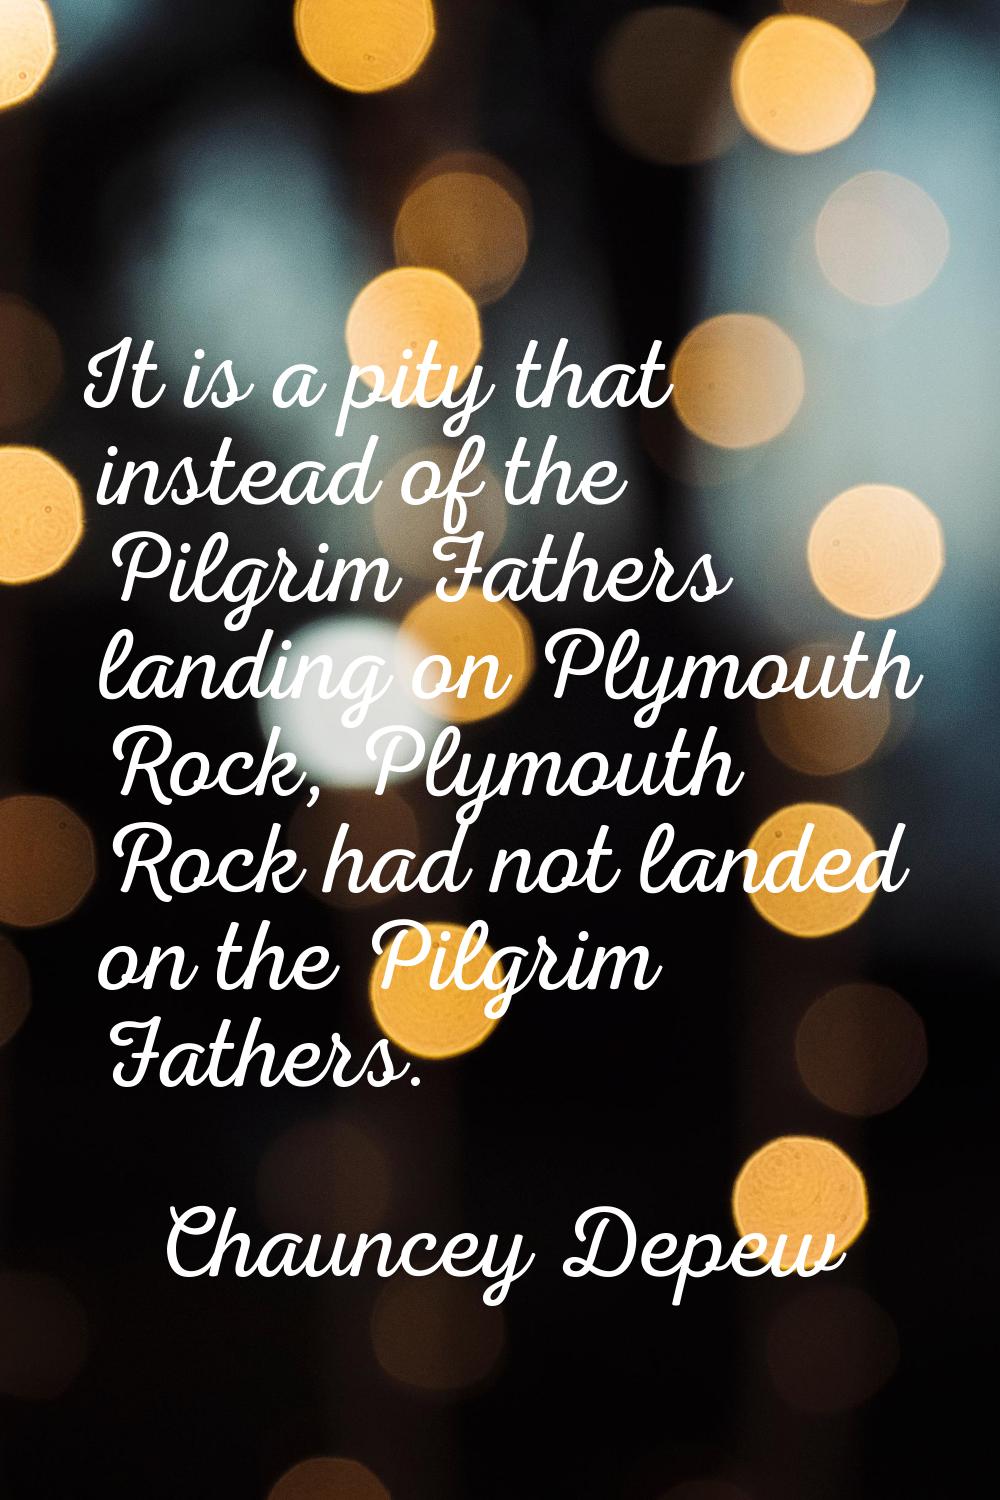 It is a pity that instead of the Pilgrim Fathers landing on Plymouth Rock, Plymouth Rock had not la